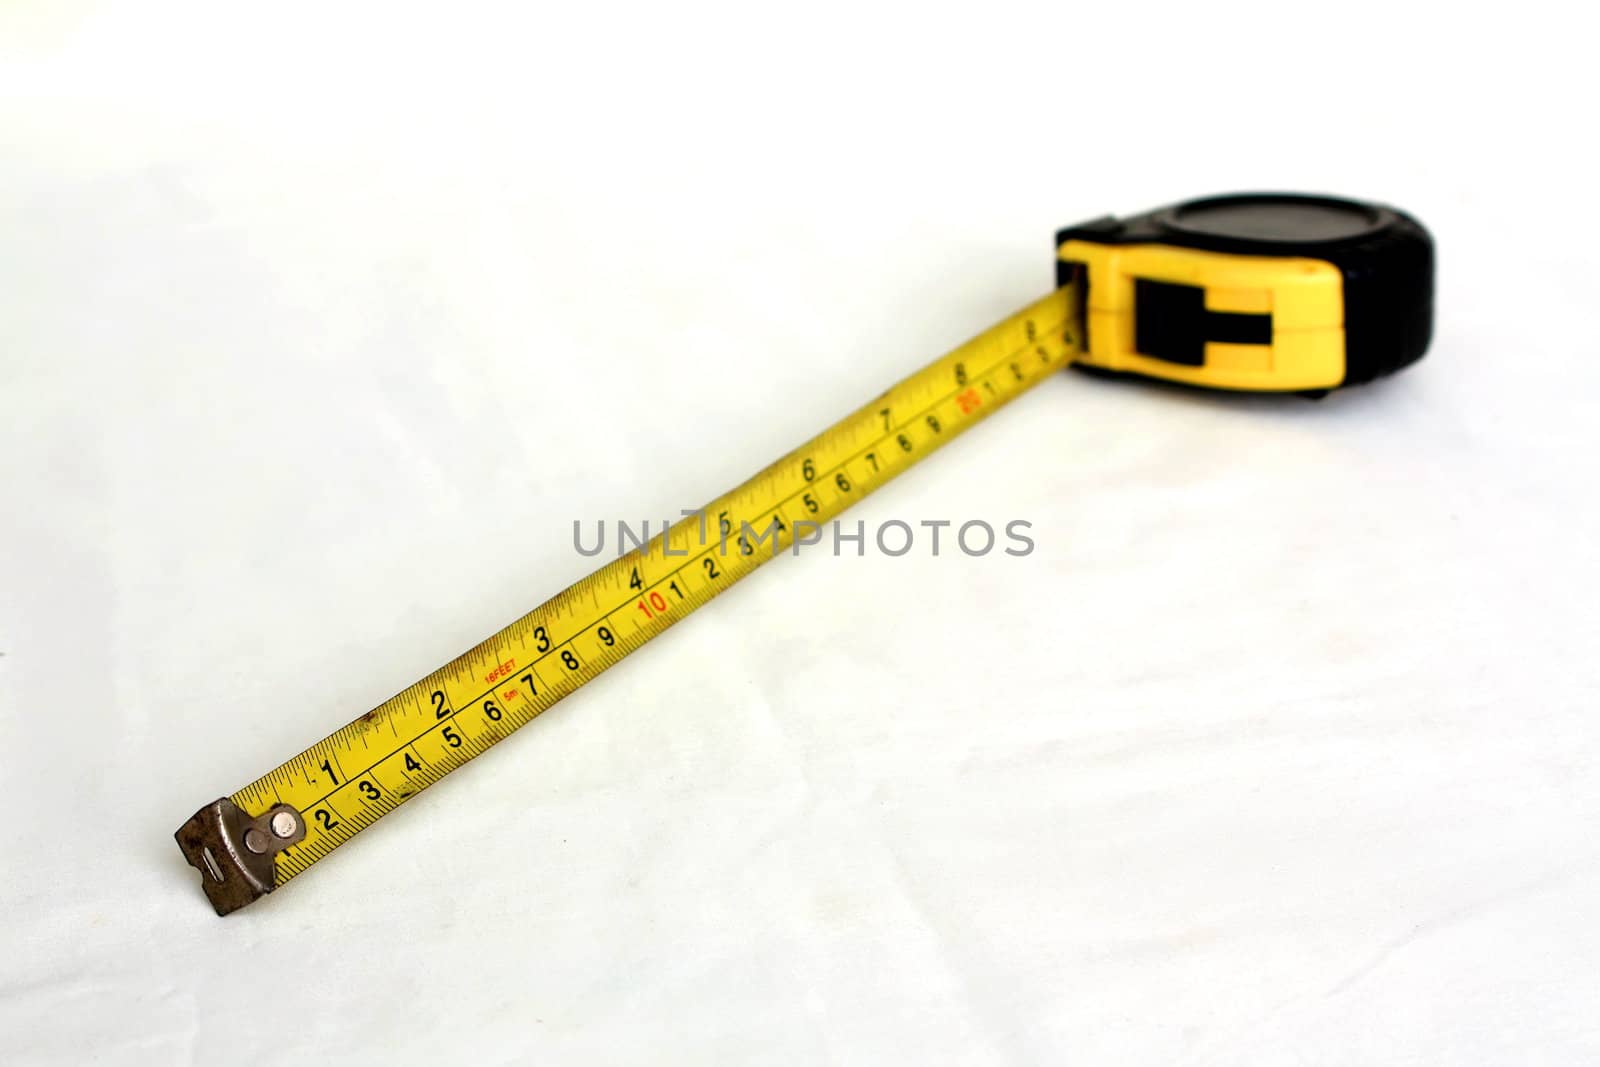 Measuring tape by phanlop88